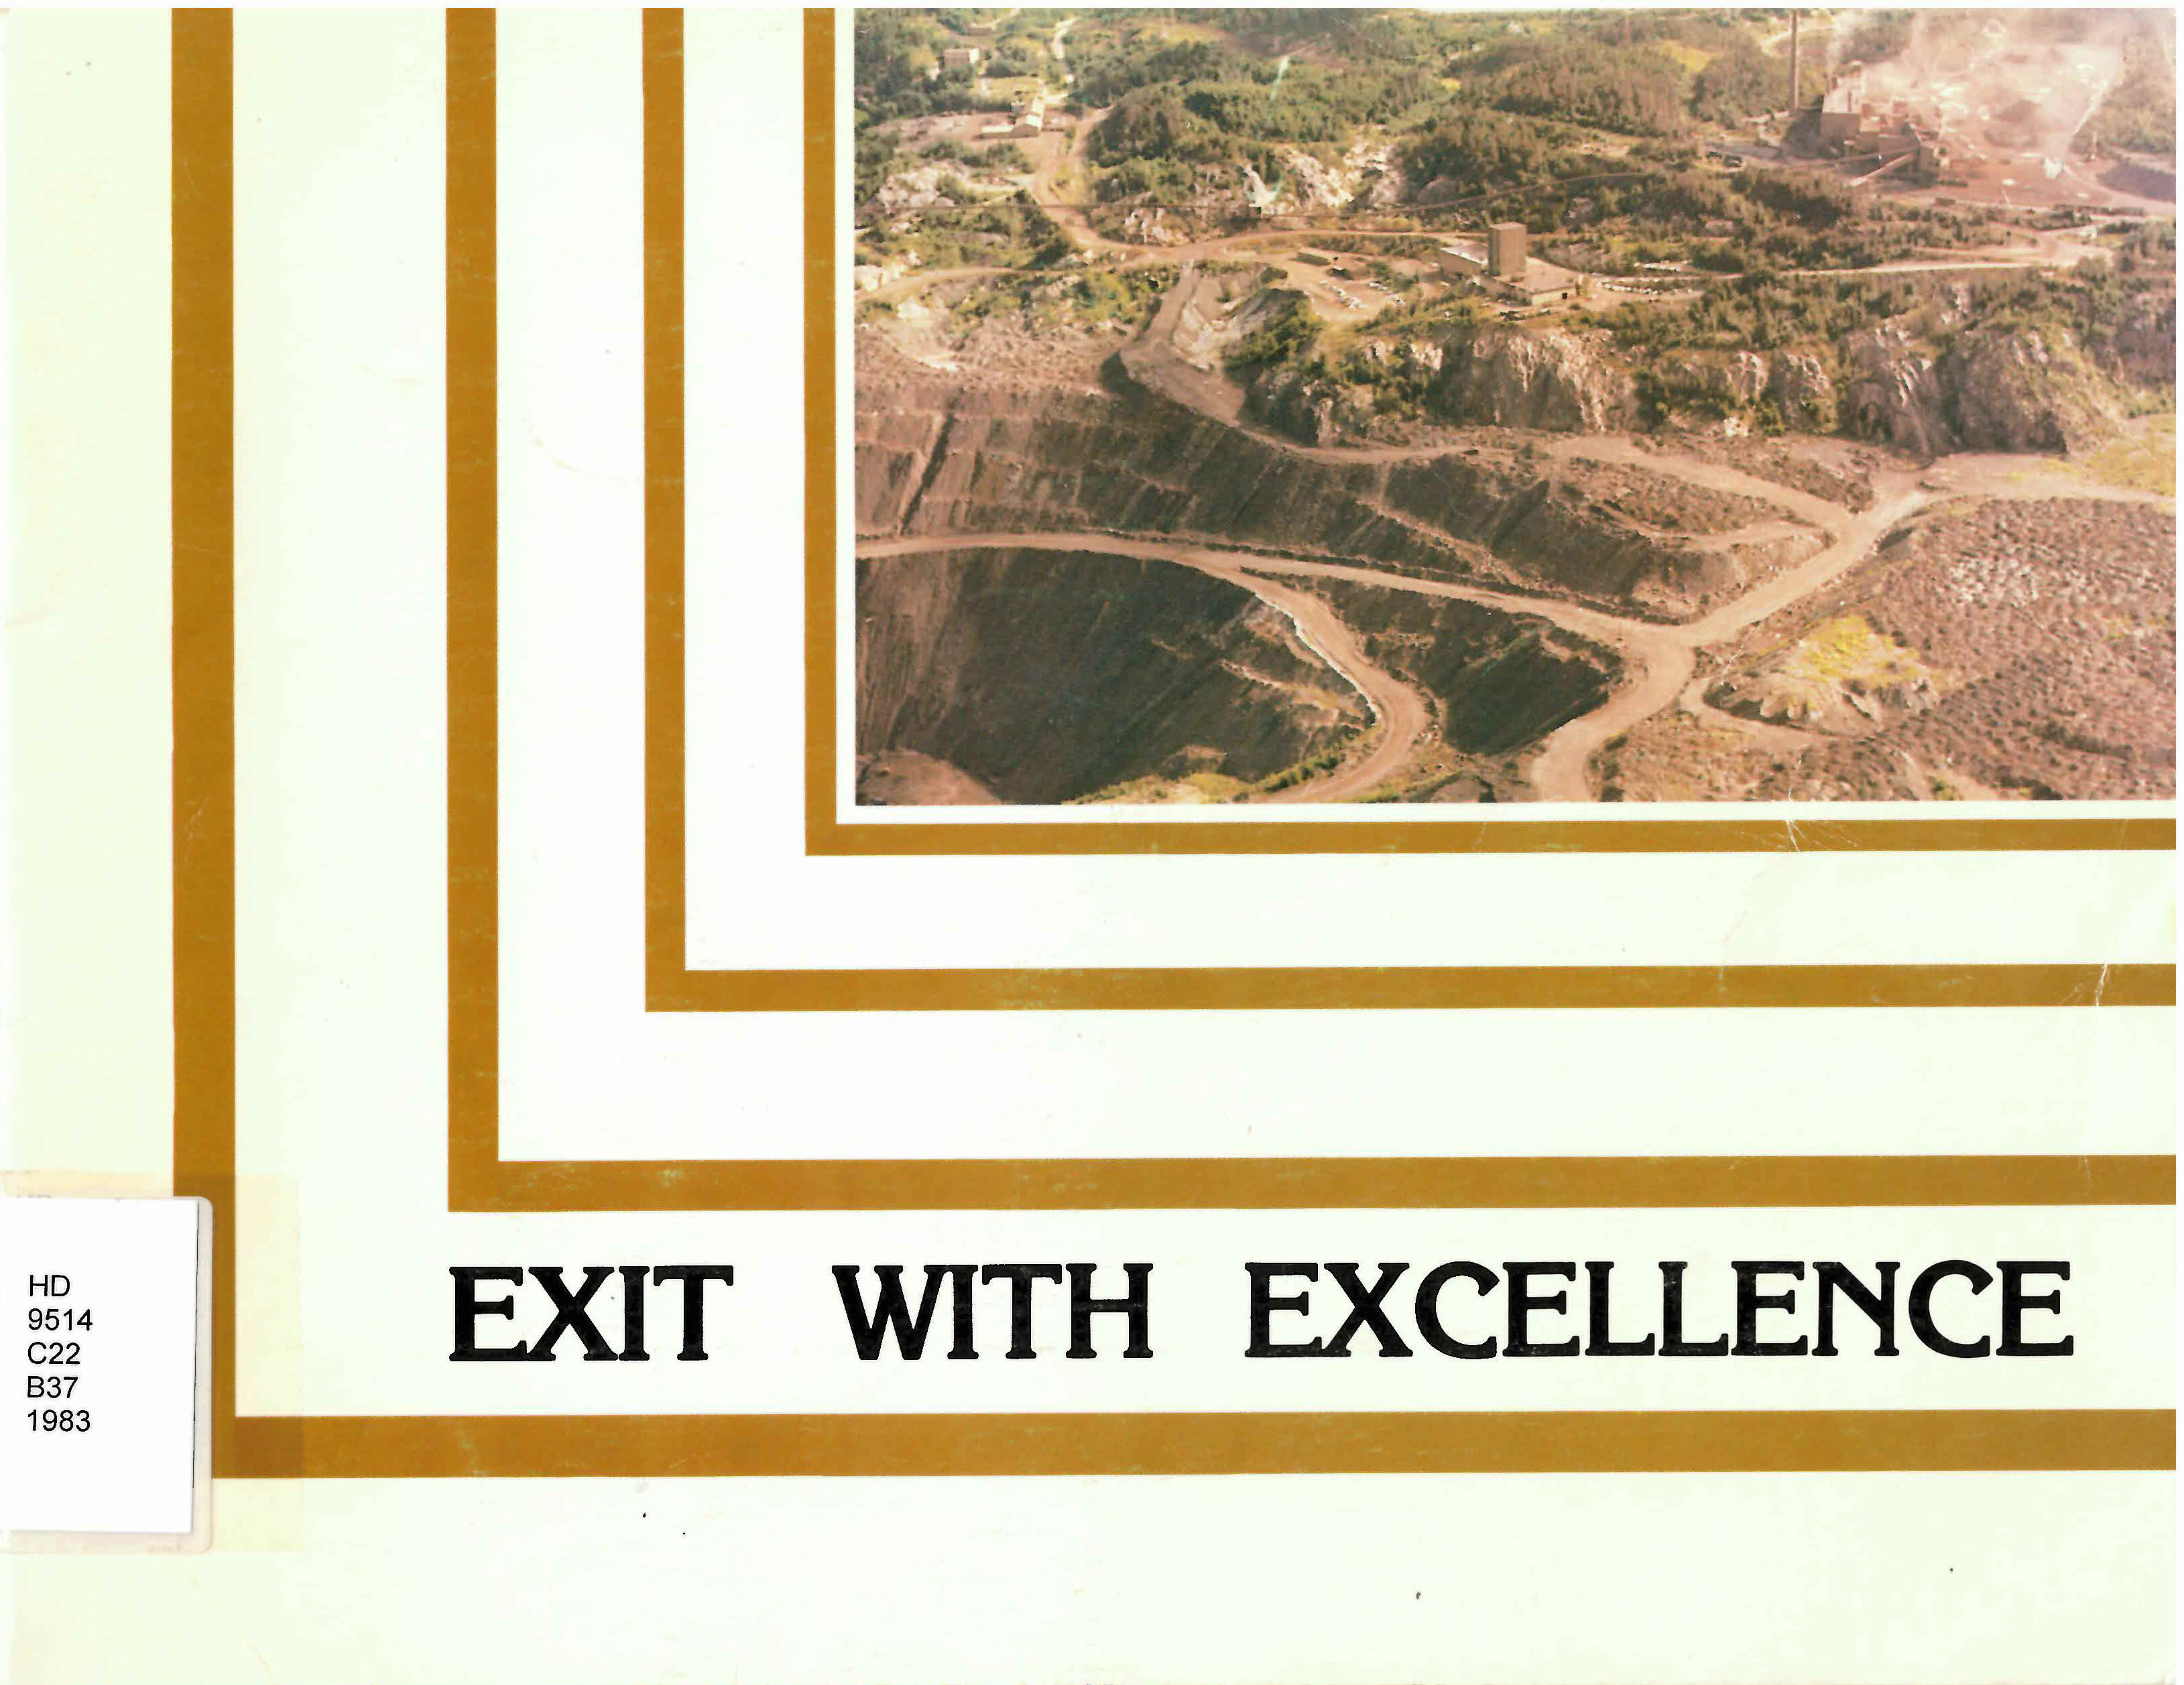 Exit with excellence: : how one unusual shutdown transformed  mining traditions : Caland Ore Co. Ltd., Atikokan, Ontario,  1960-1980. /